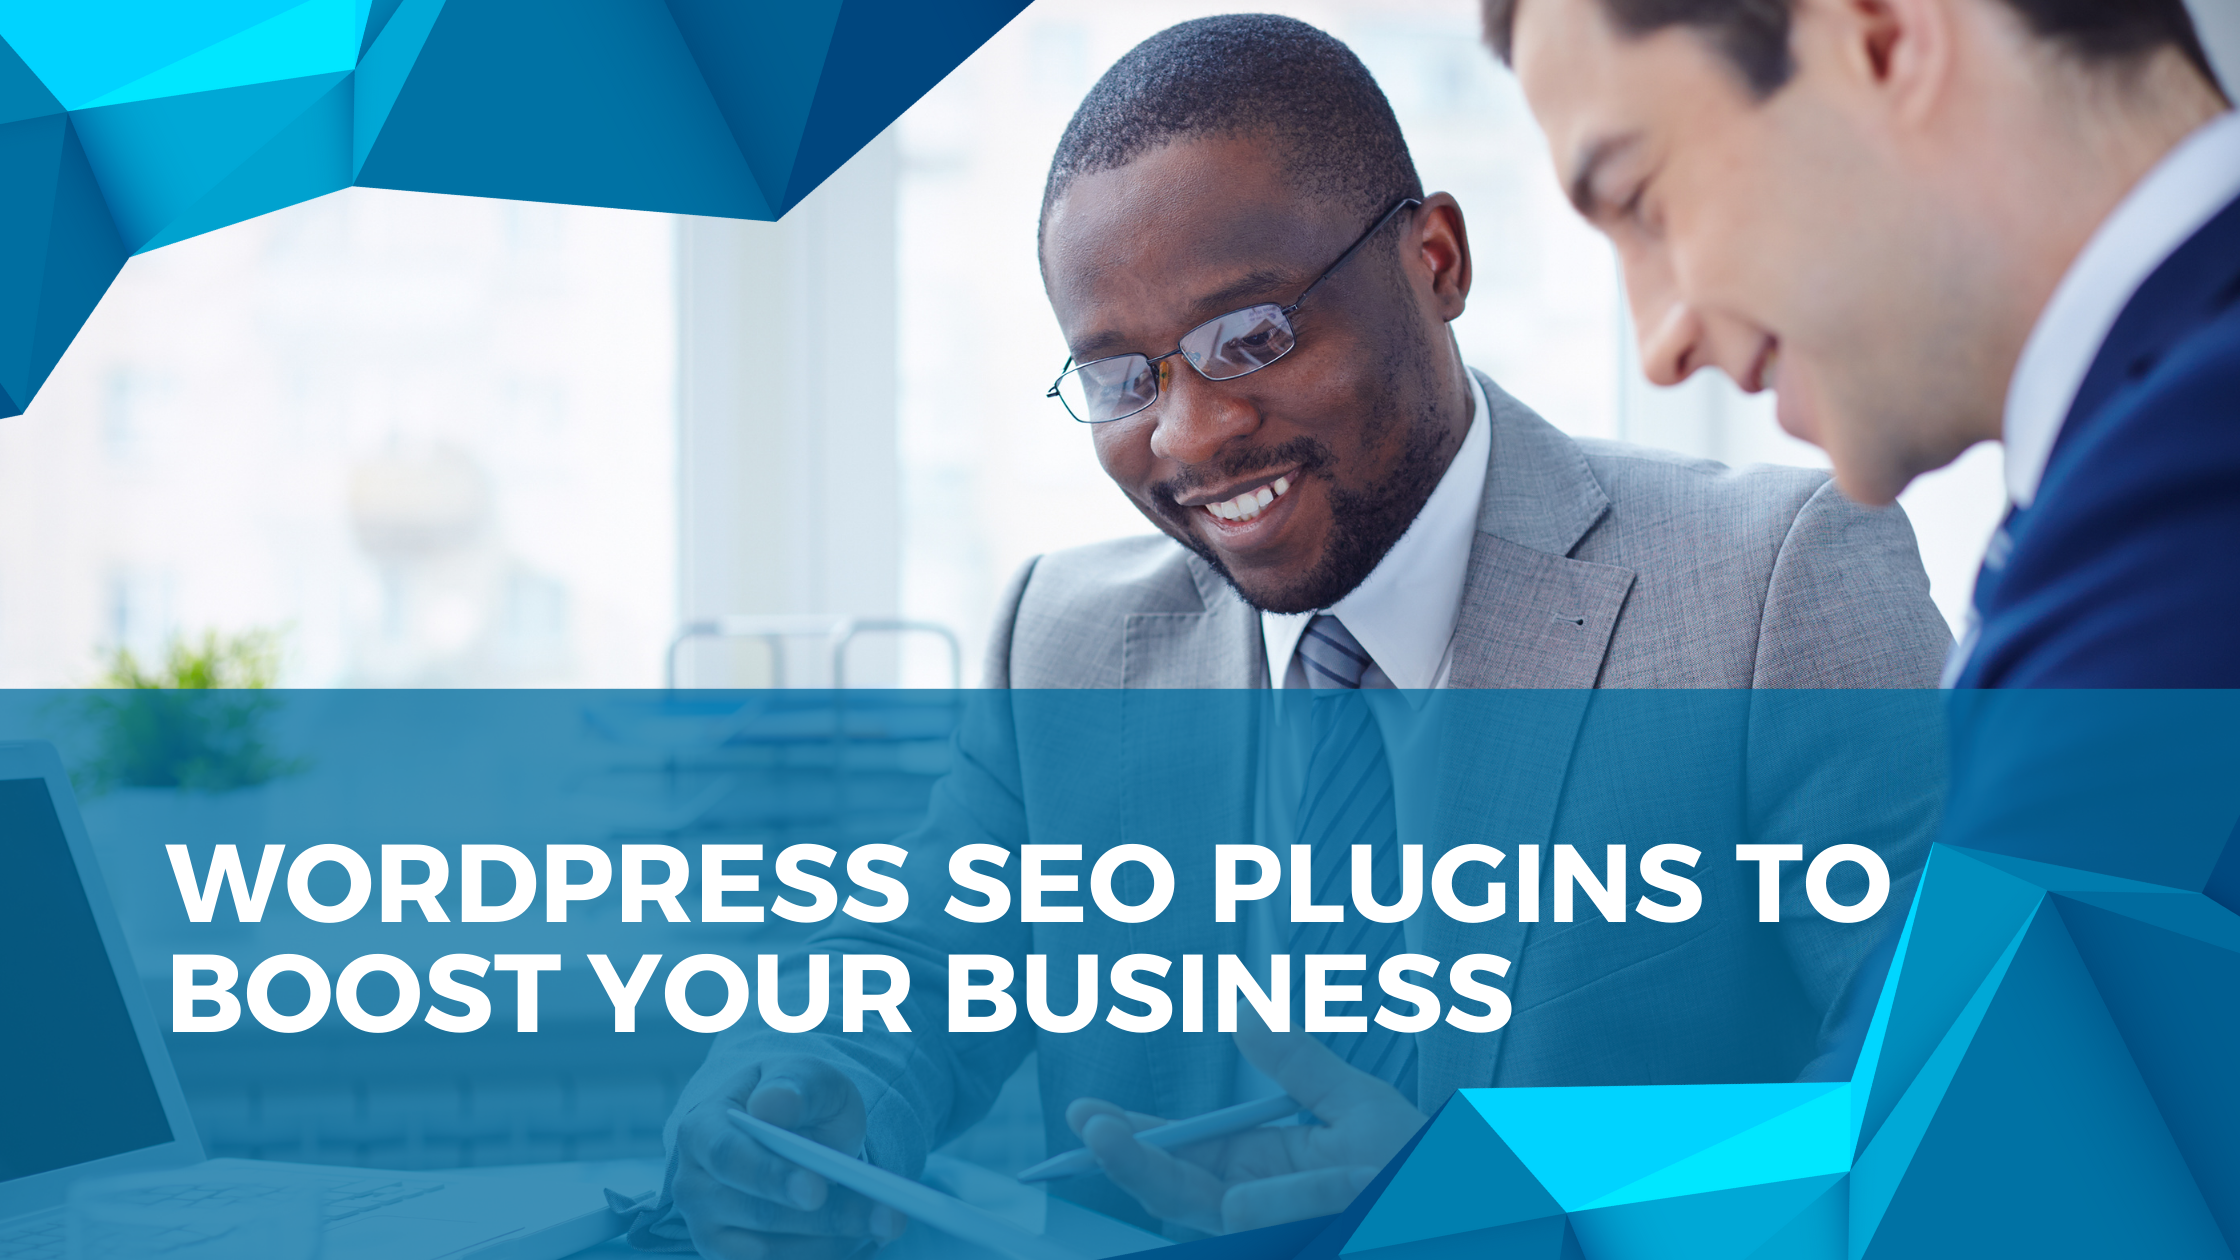 WordPress SEO Plugins to Boost your Business